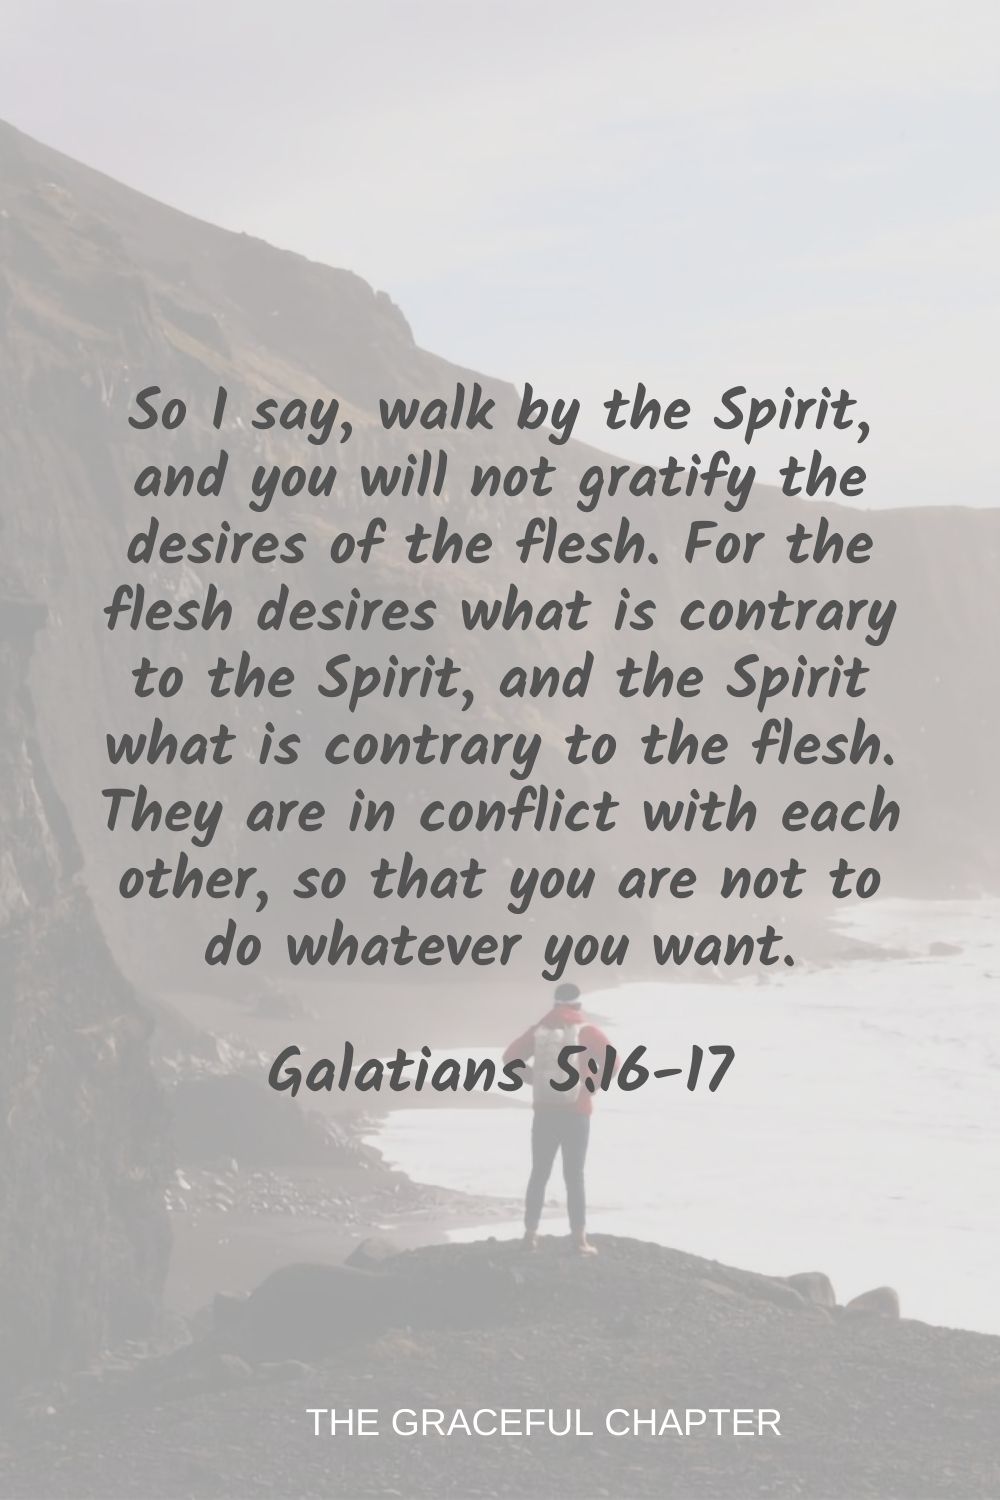 So I say, walk by the Spirit, and you will not gratify the desires of the flesh. For the flesh desires what is contrary to the Spirit, and the Spirit what is contrary to the flesh. They are in conflict with each other, so that you are not to do whatever you want. Galatians 5:16-17